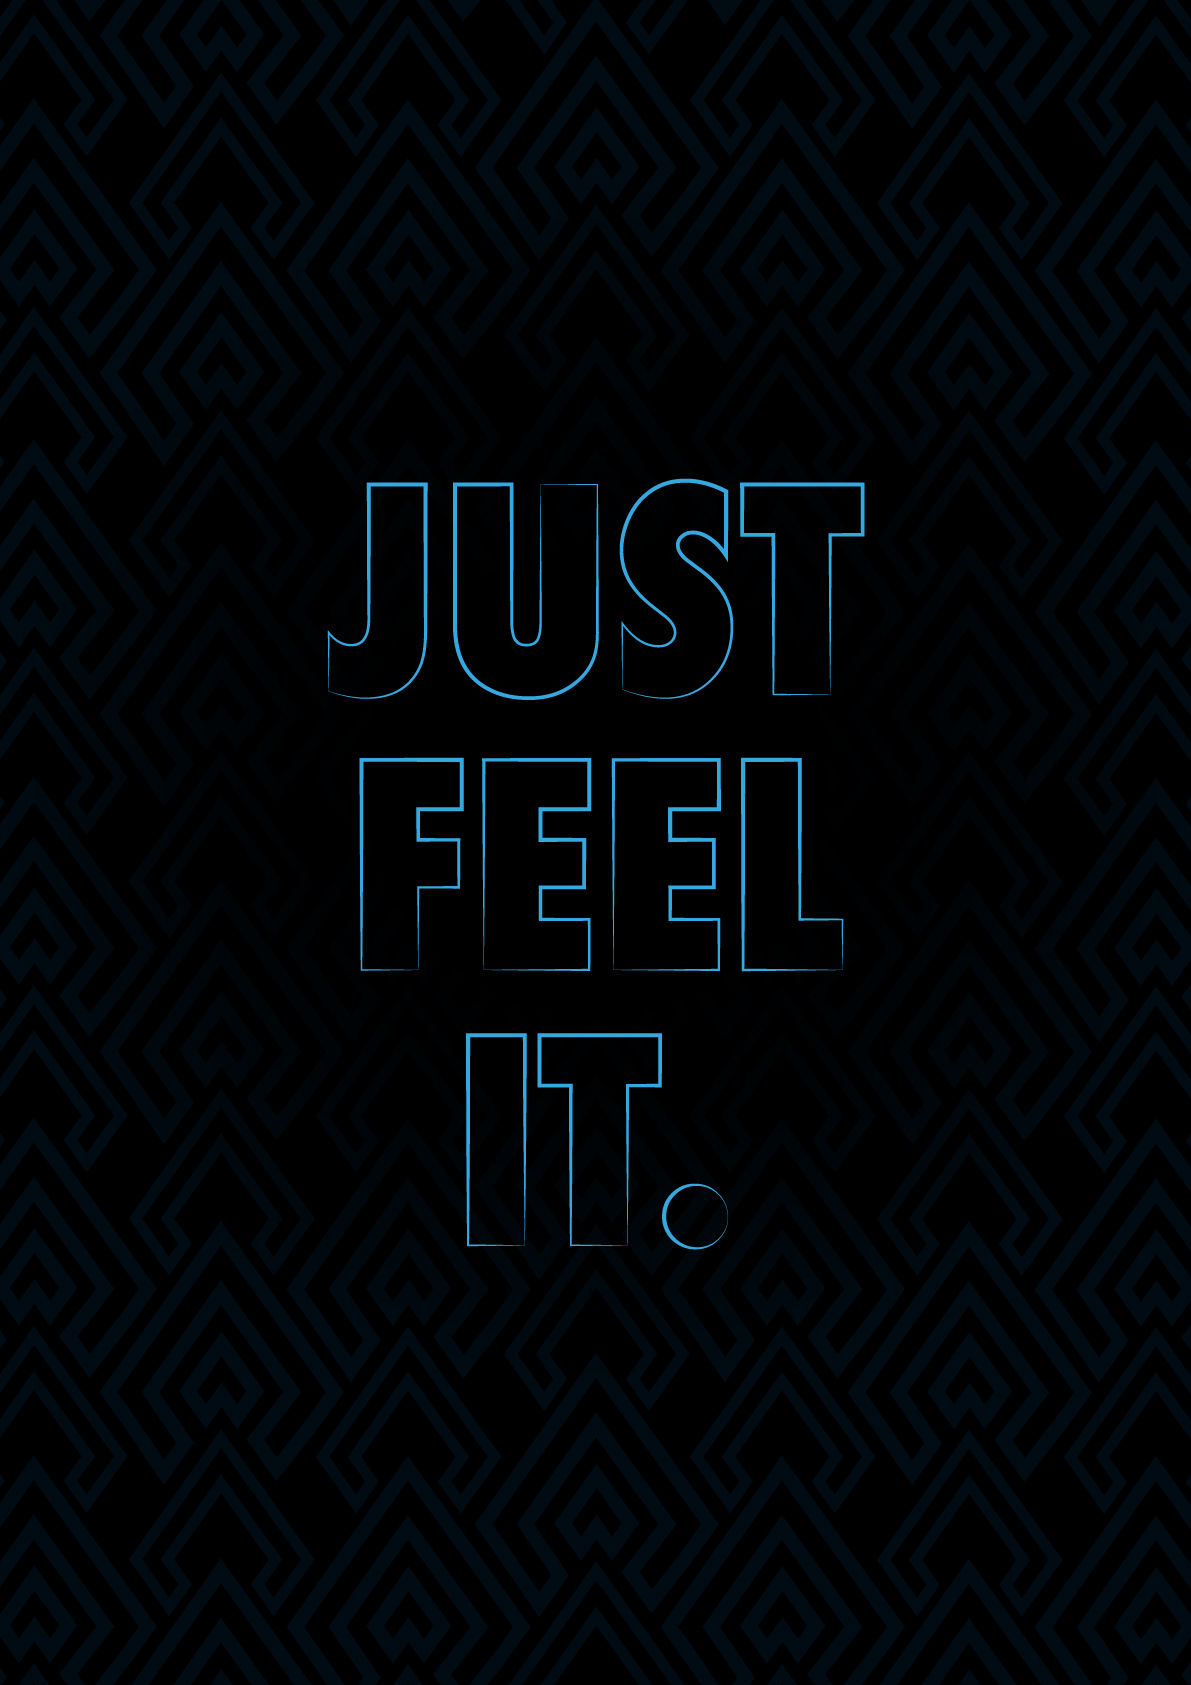 Just feel it rendition image